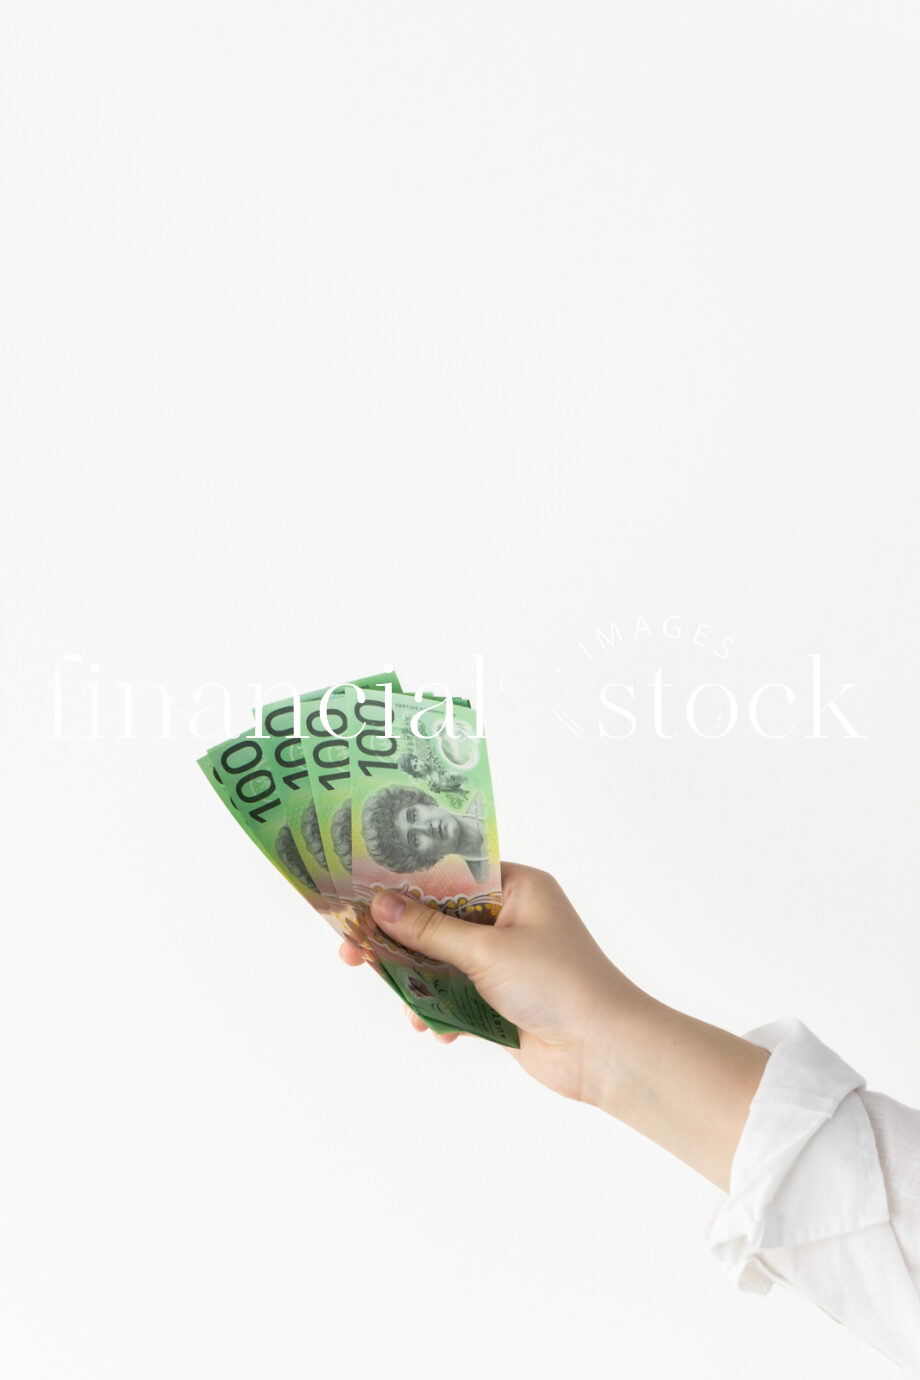 Financial Stock Images - Home office images and settings.